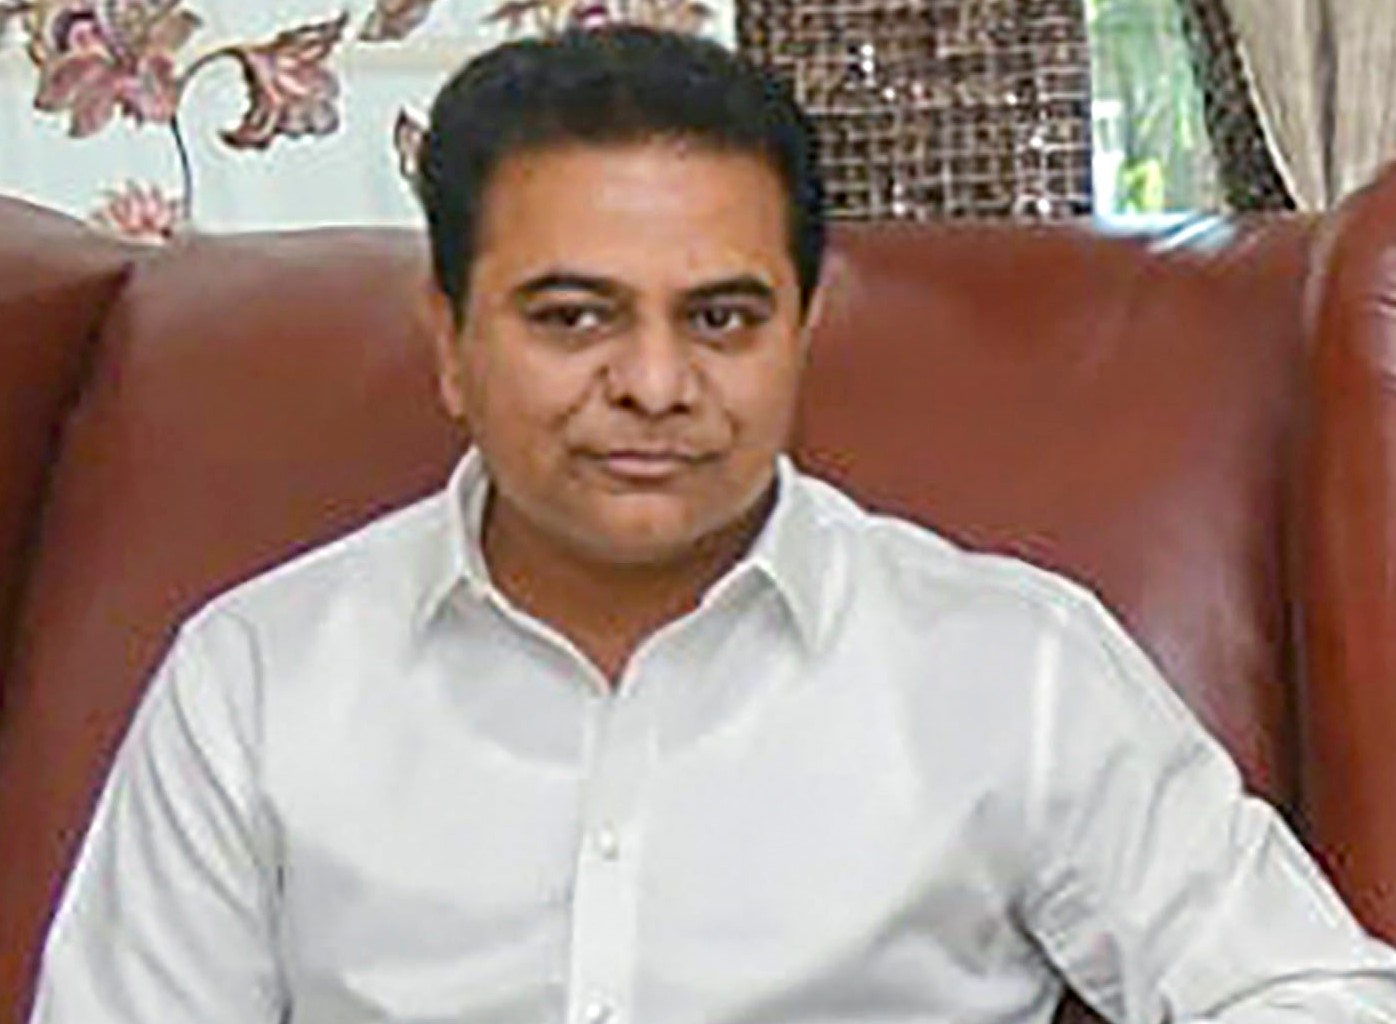 Change Ahmedabad’s name to ‘Adanibad’, KTR hits back a day after BJP’s Bhagyanagar pitch